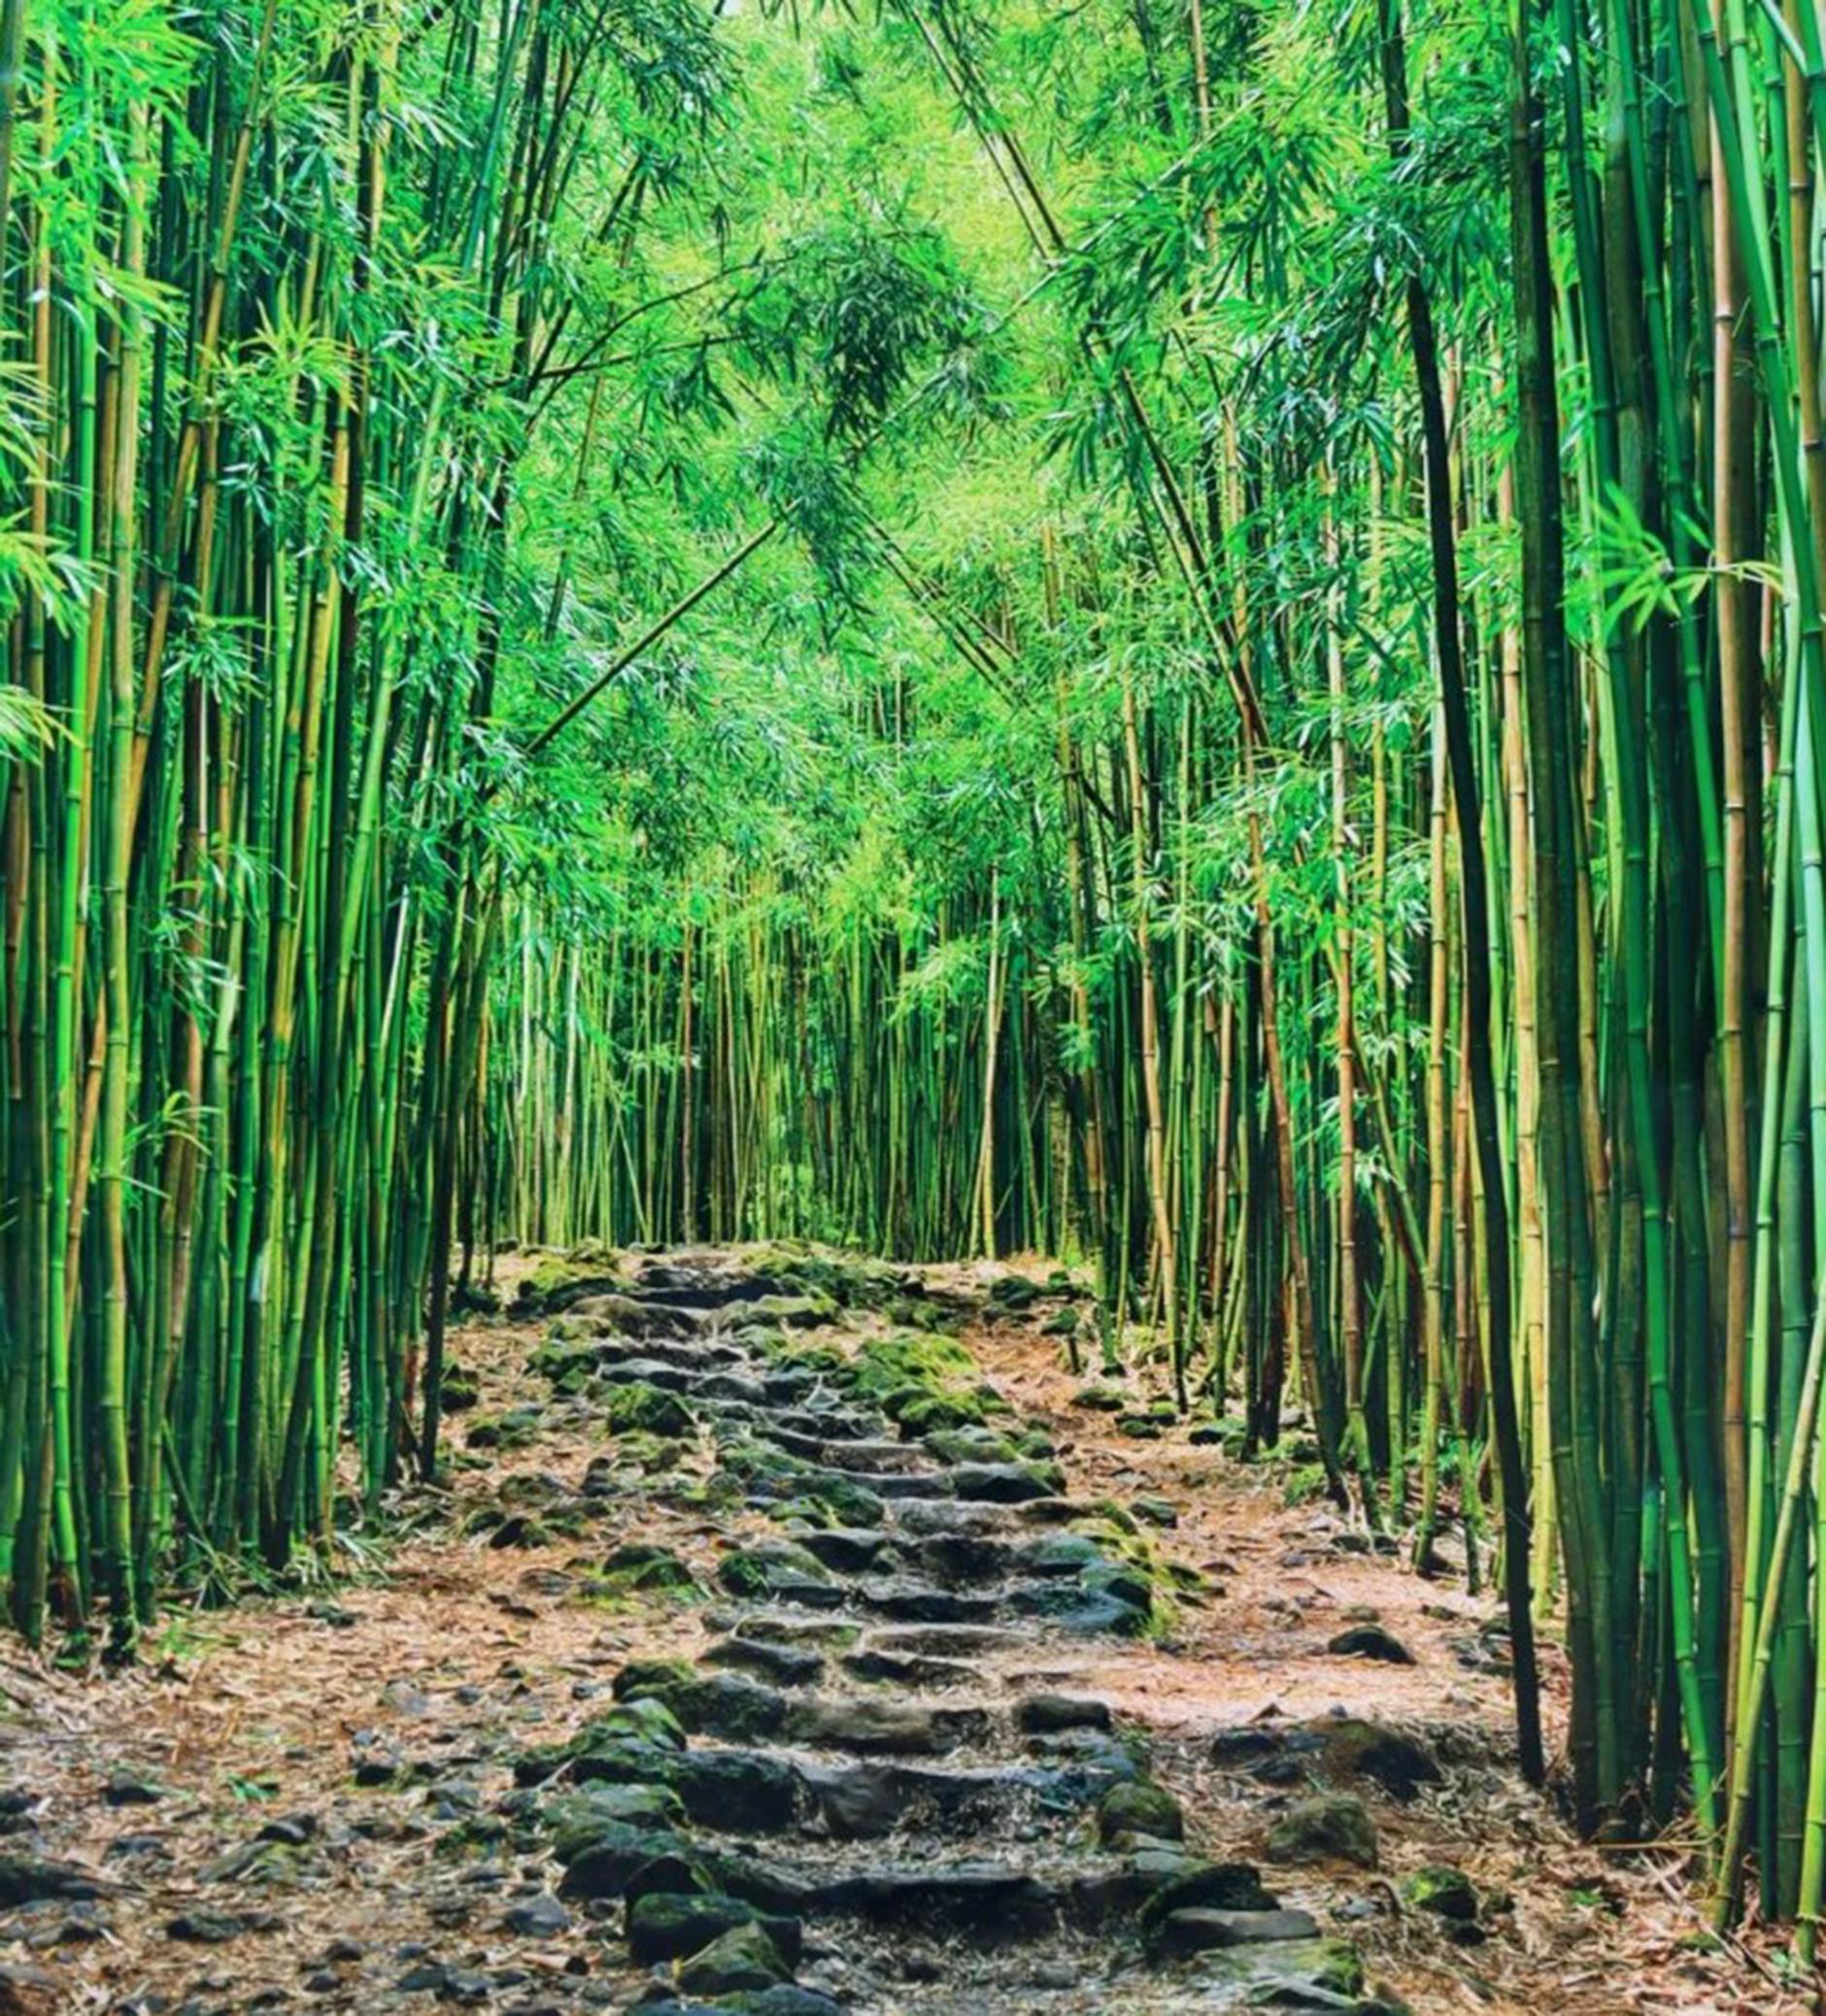 Acrylic Lucky Bamboo Path Photo Taken by Peter Lik in Maui Hawaii, Green Bamboo, Framed For Sale